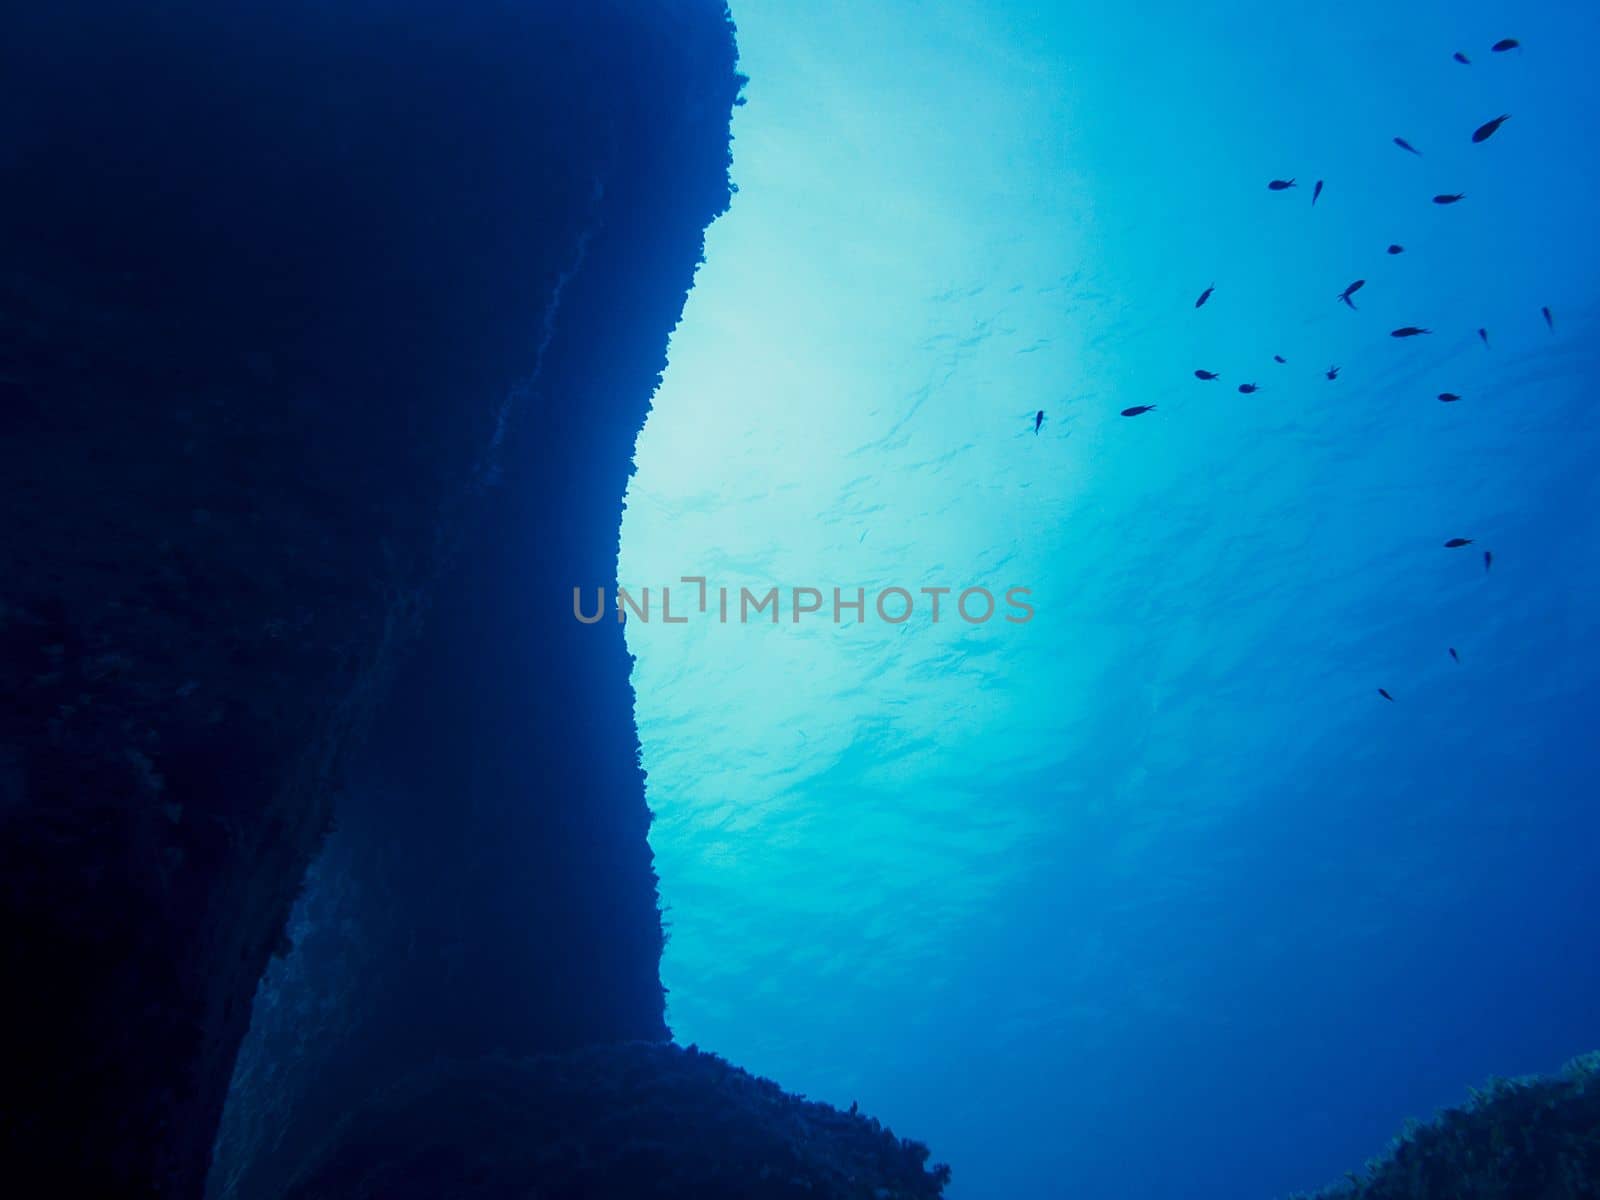 underwater background with small fish and rocks by raulmelldo